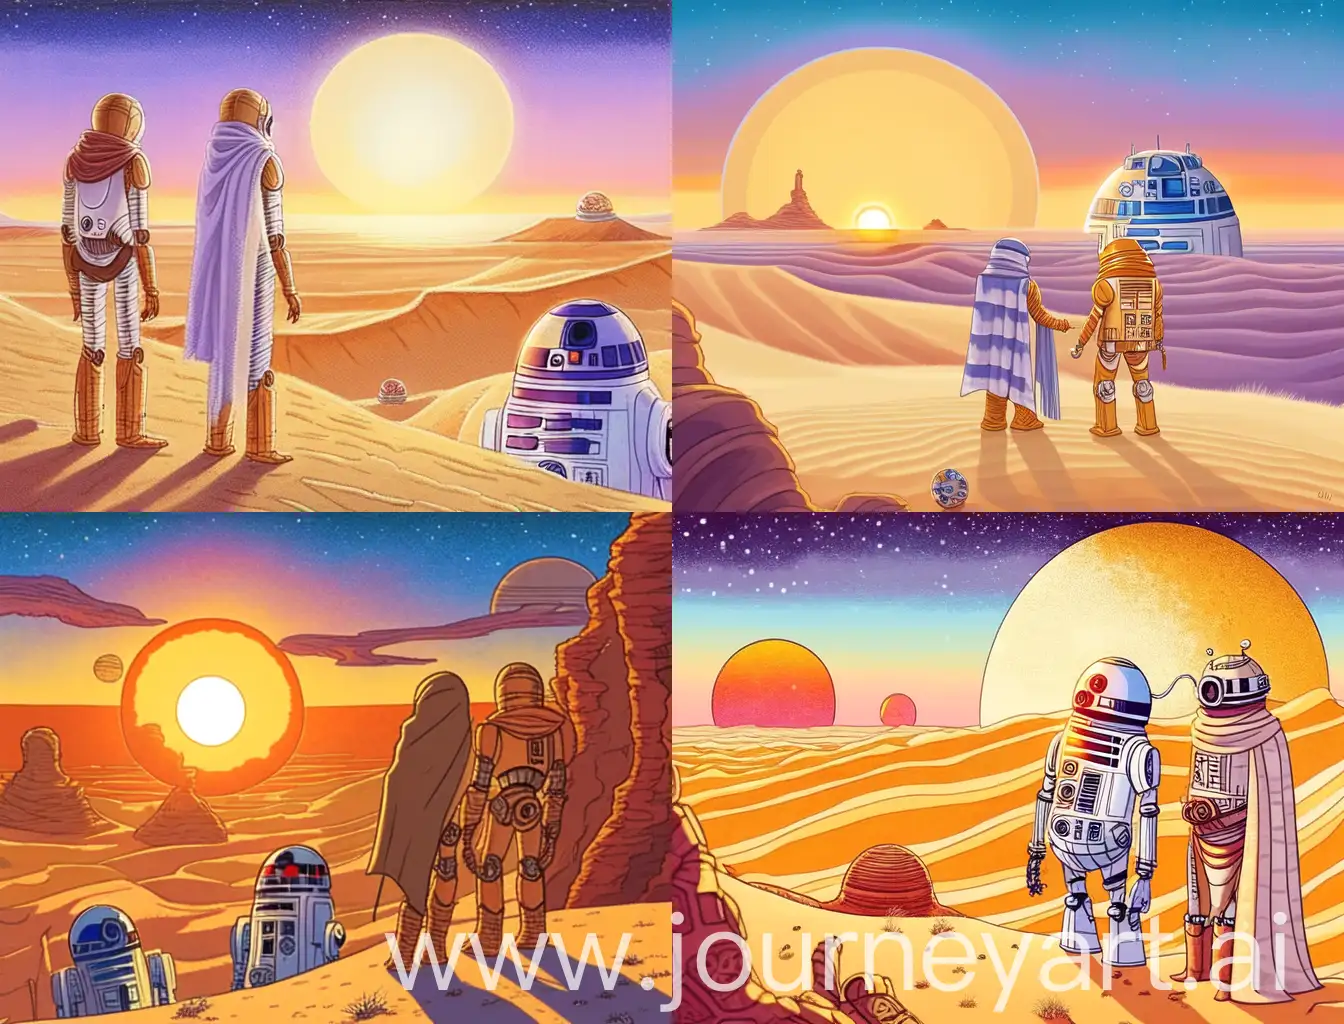 Anime-style illustration of R2-D2 and C-3PO, standing on the desert planet Tatooine, watching the twin suns set on the horizon. They wore linen shawls, with a thoughtful expression. The background includes the vast desert landscape, sand dunes, and the glowing twin suns in the sky. In the style of Studio Ghibli, with vibrant colors and detailed character design. Dynamic lighting and atmospheric effects.
